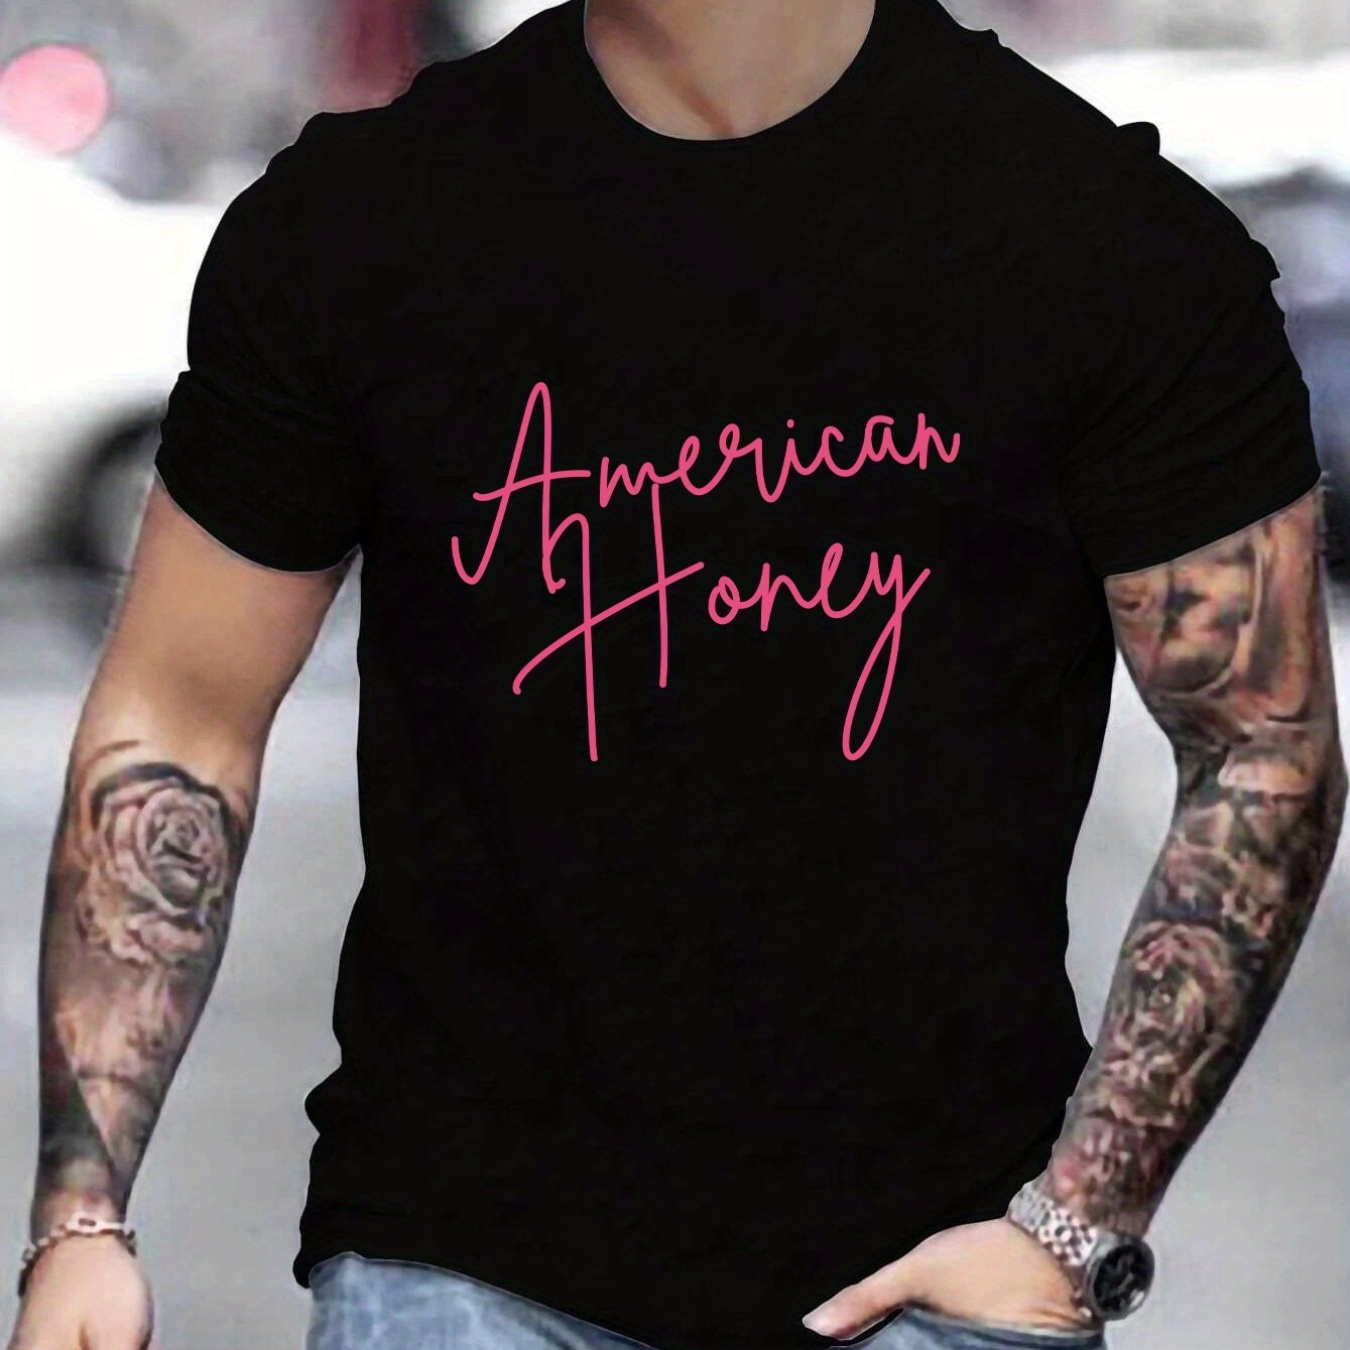 

'american Honey' Round Neck Graphic T-shirts, Causal Tees, Short Sleeves Comfortable Tops, Men's Summer Clothing